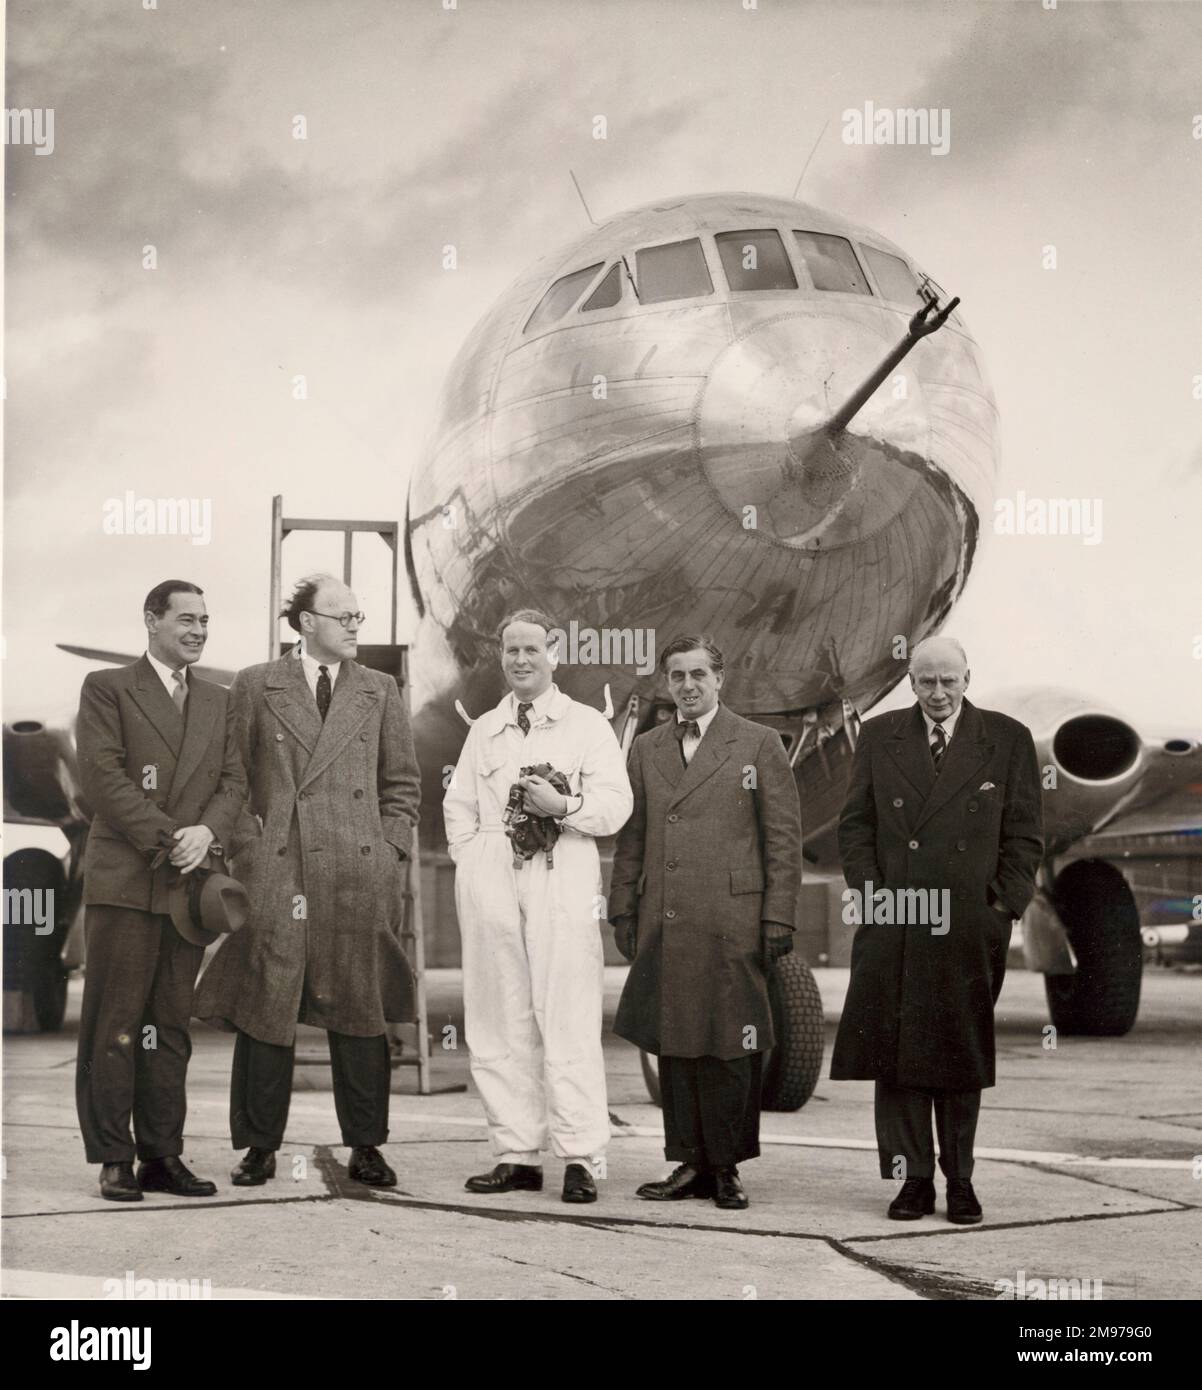 From left: Sir Yeo Cribbett, Lord Packenham, Gp Capt John Cunningham, CBE, DSO**, DFC*, HonFRAeS, 1917-2002, Lindgren and Sir J. Bowhill in front of the prototype Comet airliner in 1949. Stock Photo